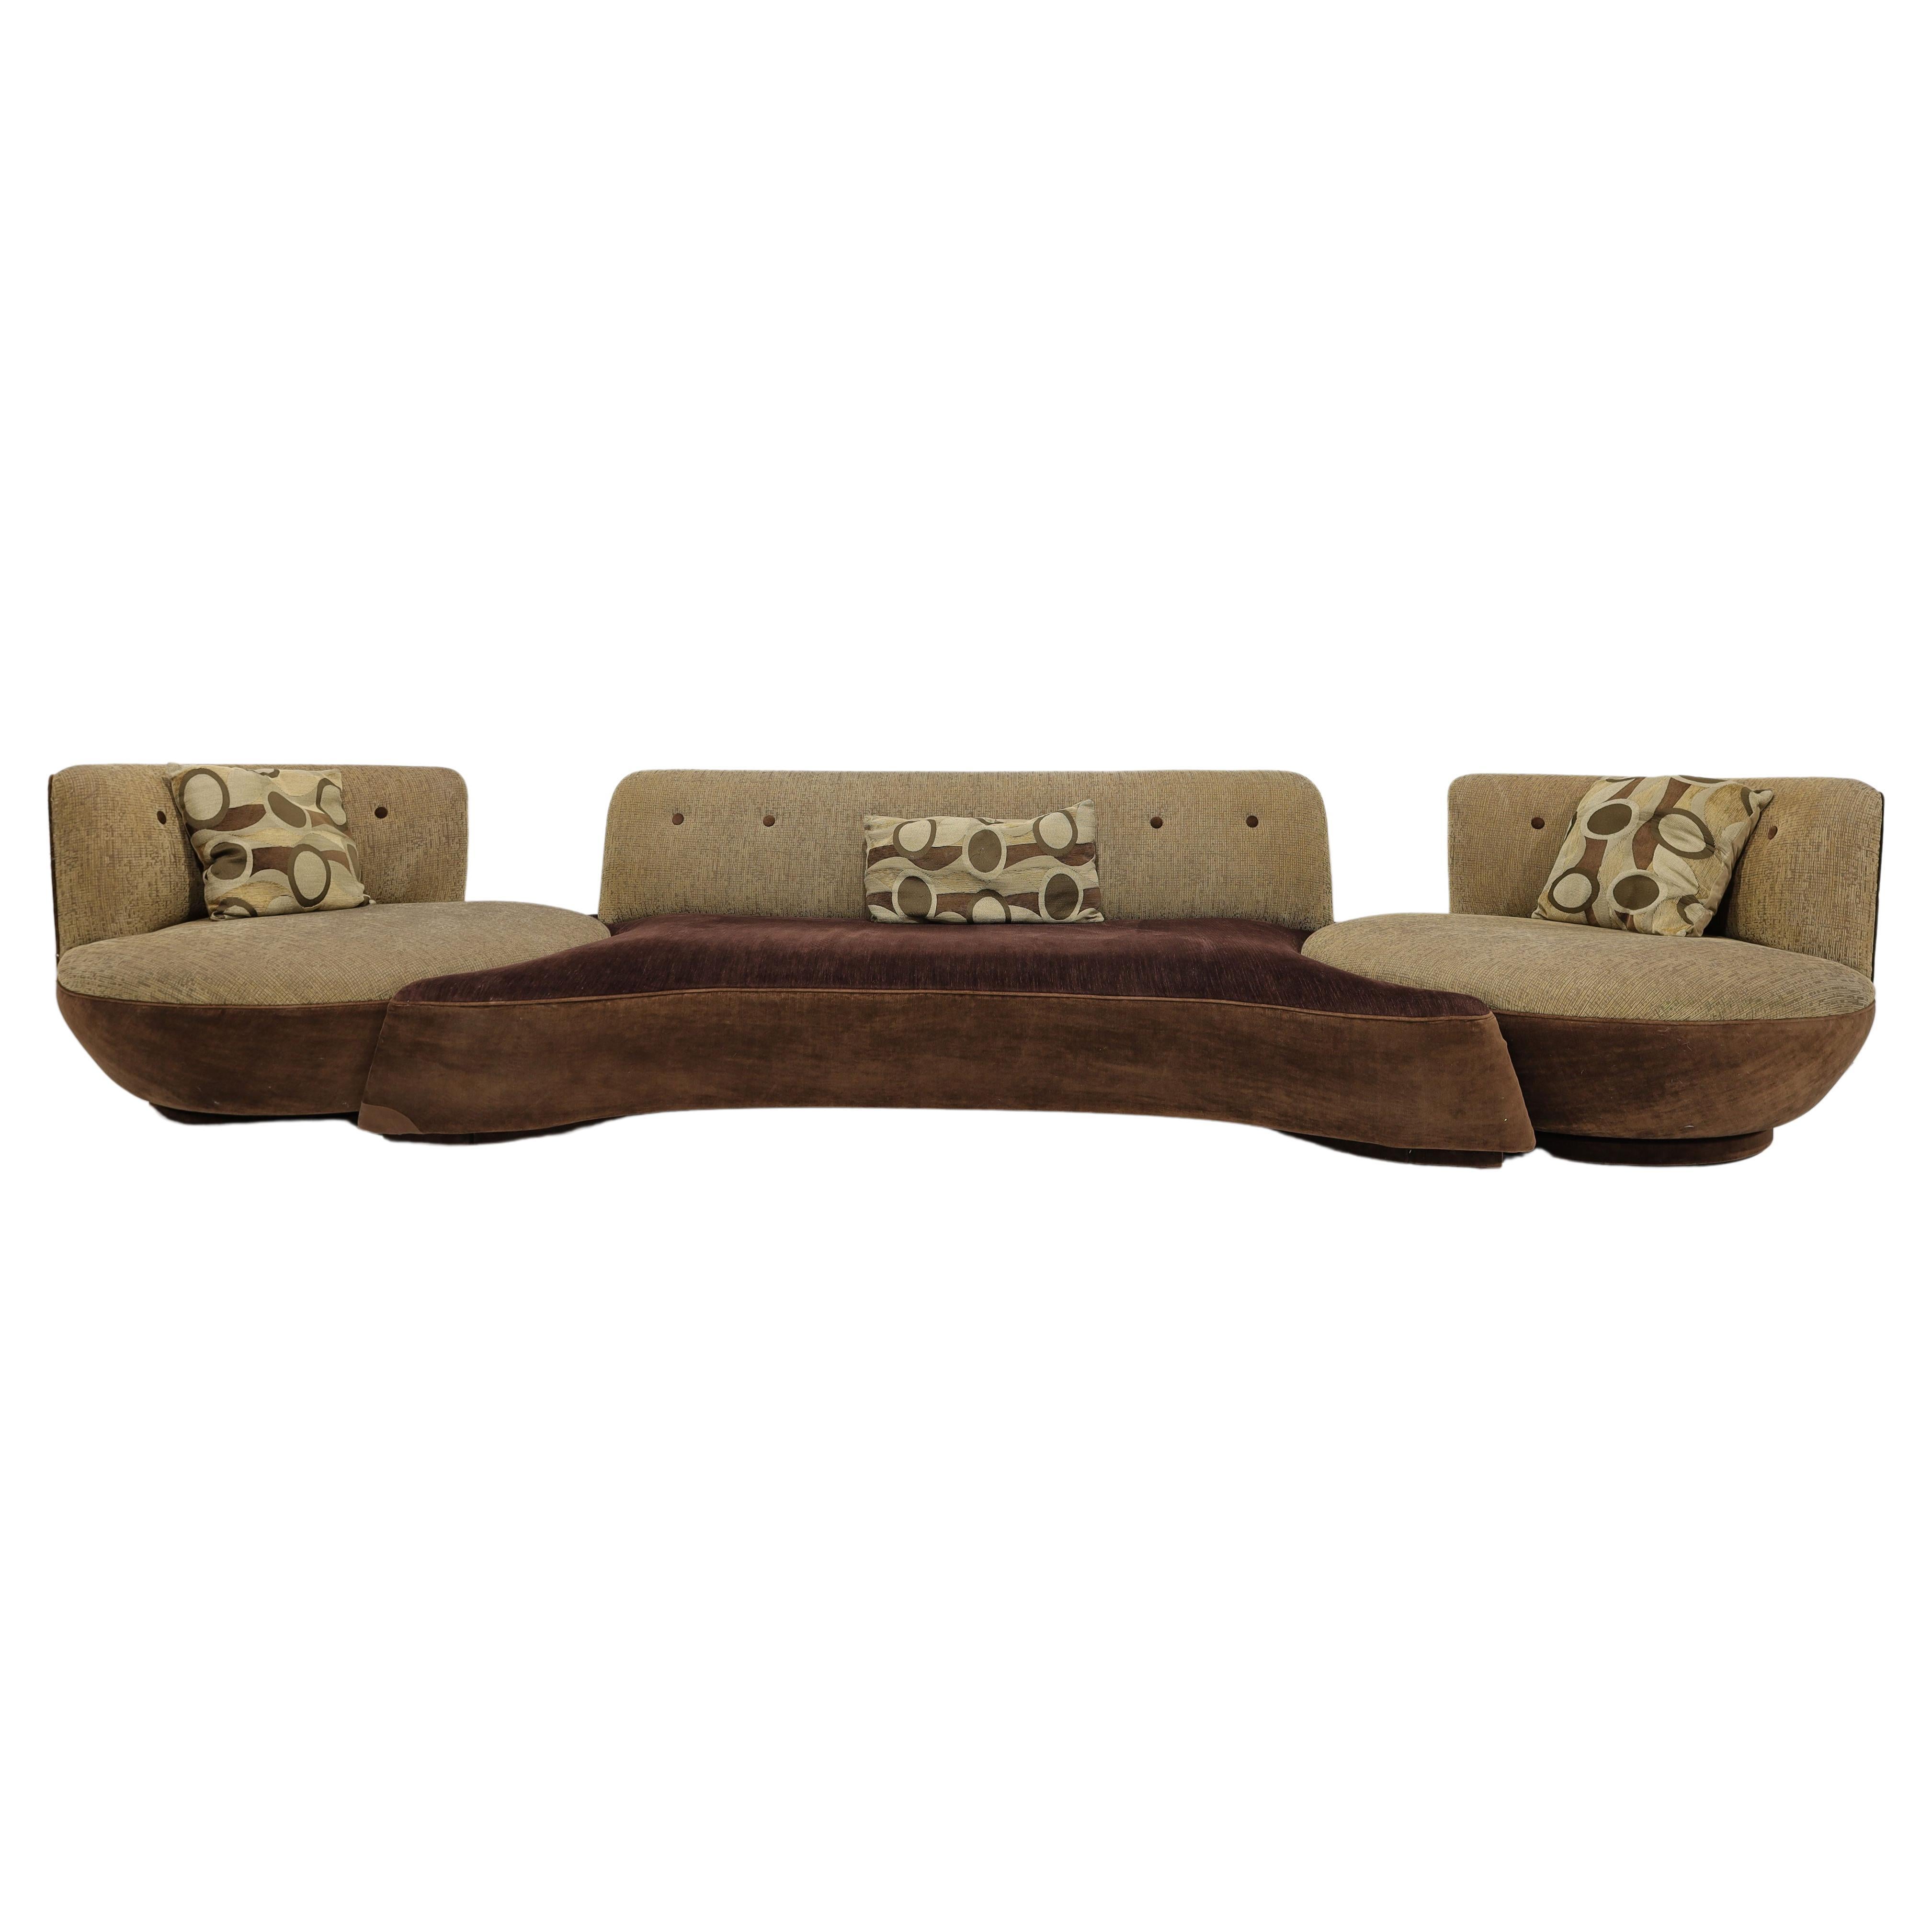 Milo Baughman for Thayer Coggin Sofa with Swivel Chairs  For Sale